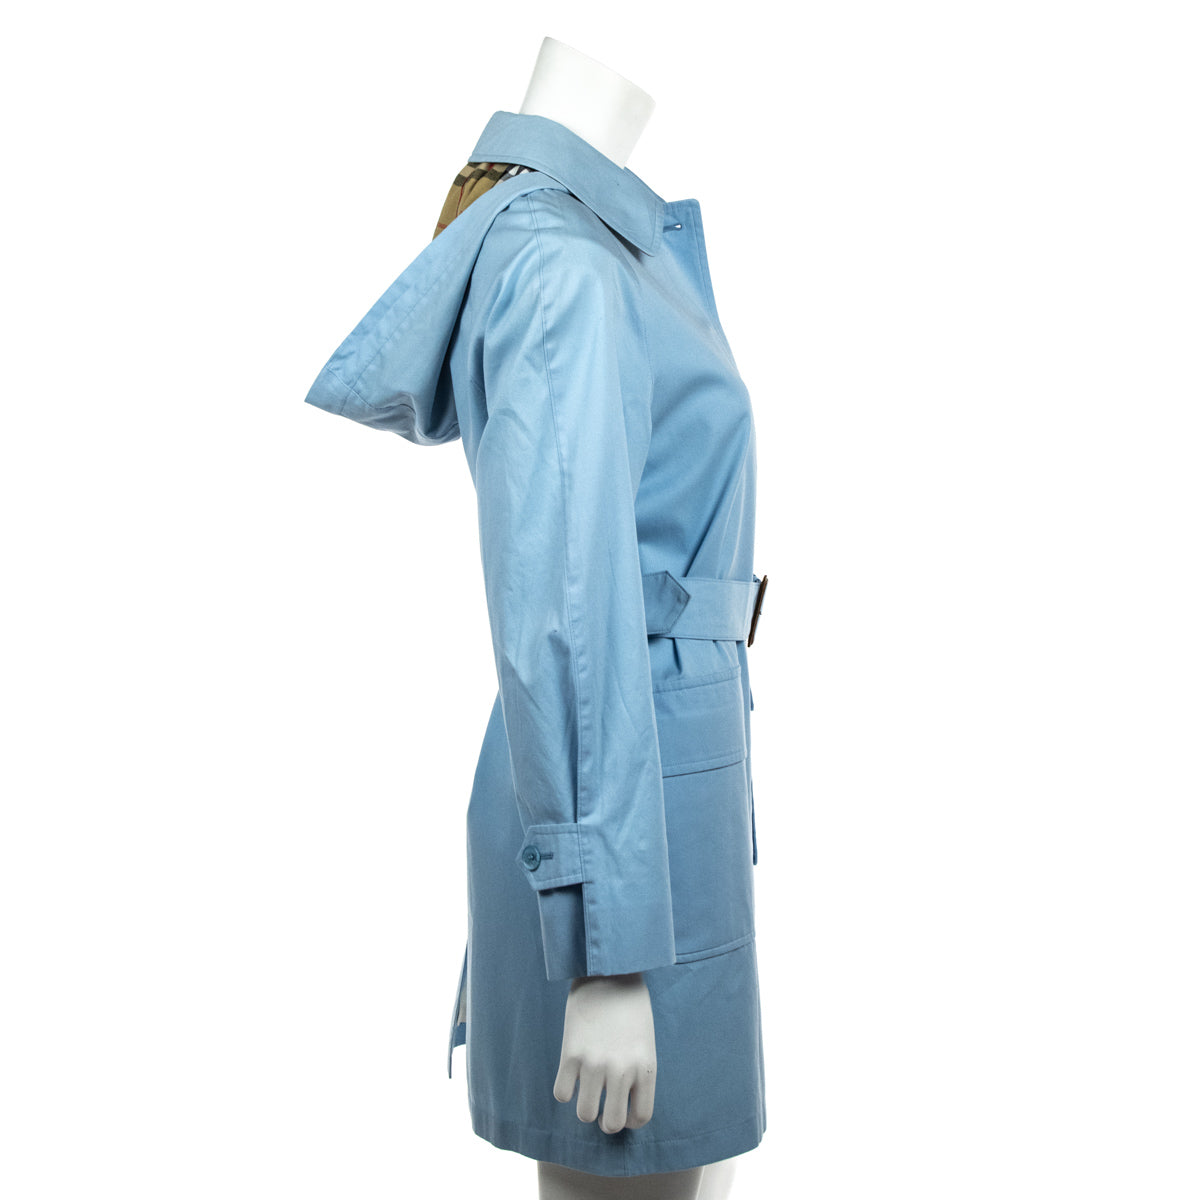 Burberry London Light Blue Hooded Trench Coat - Consign Burberry CA